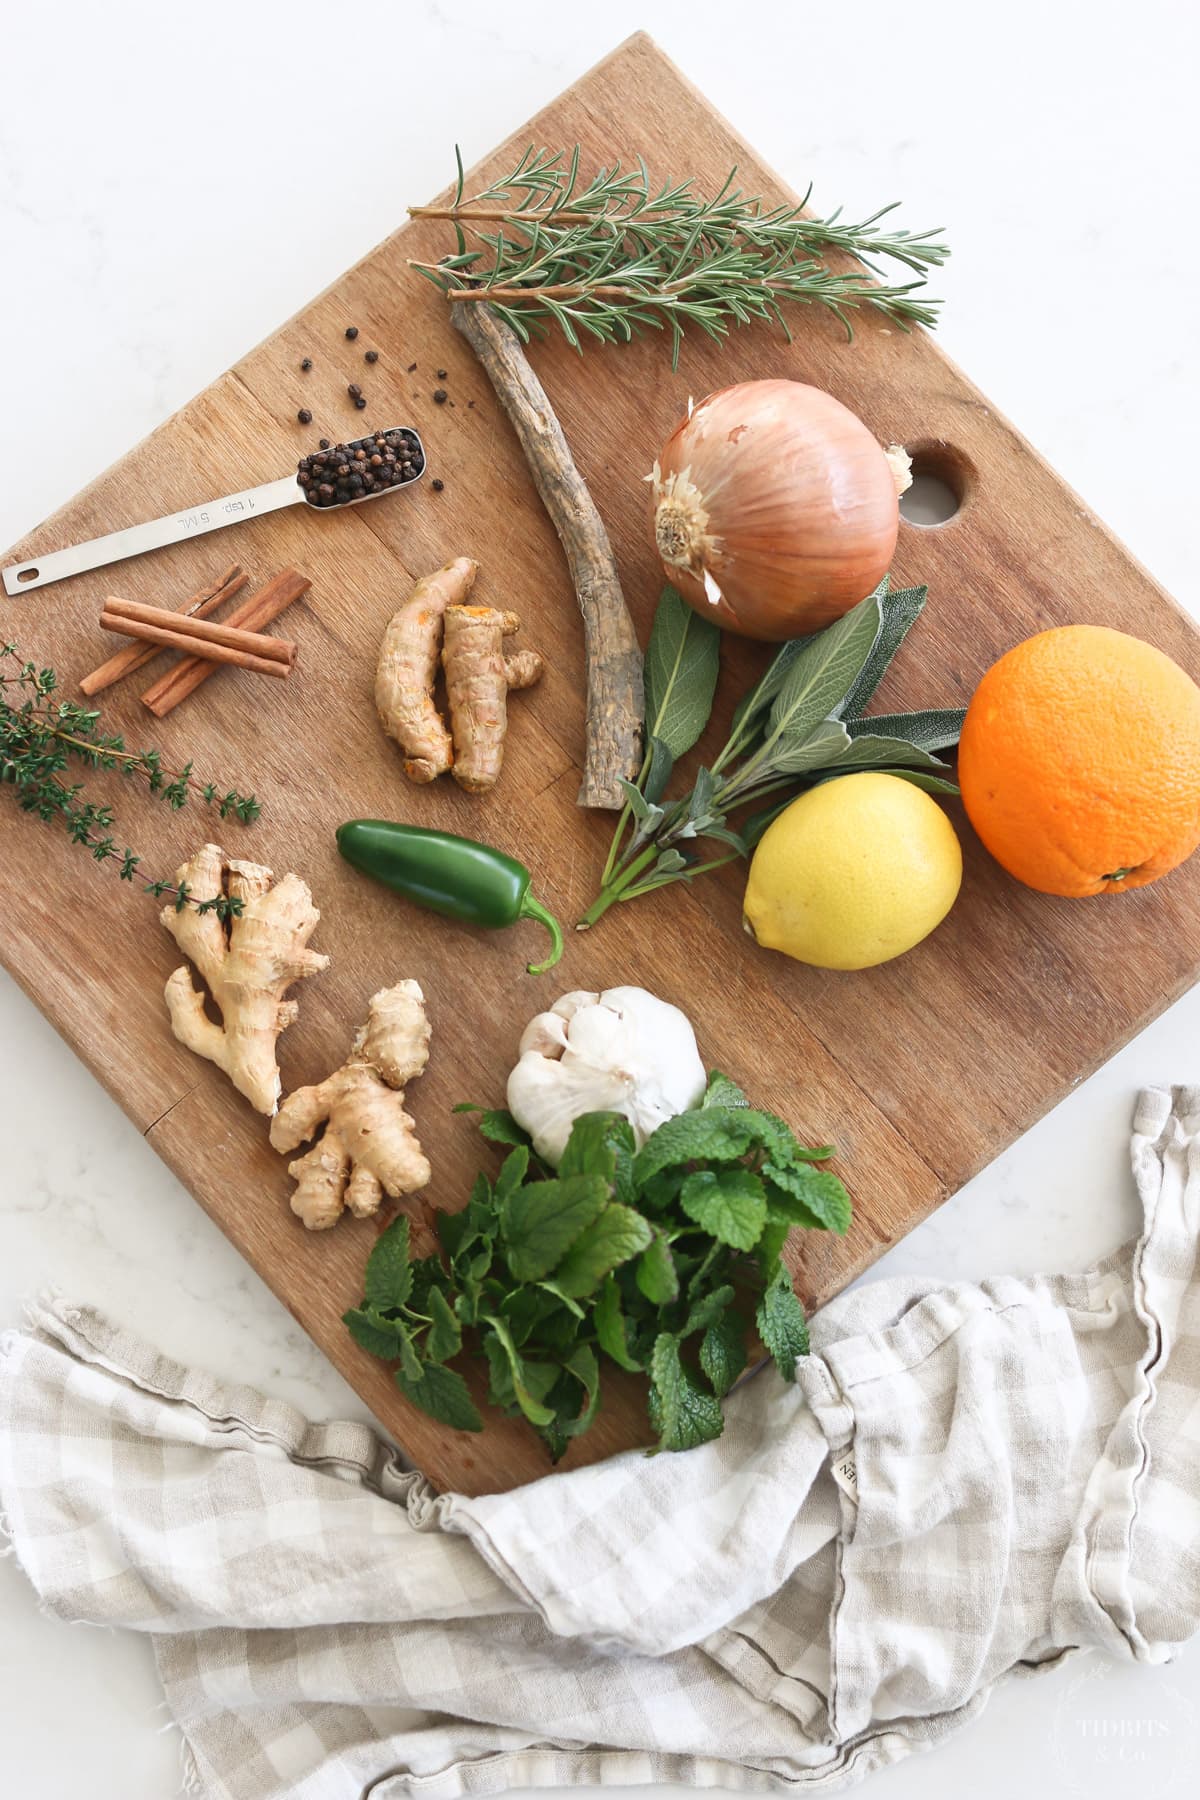 Assorted vegetables, herbs, fruits and spices on a wood cutting board